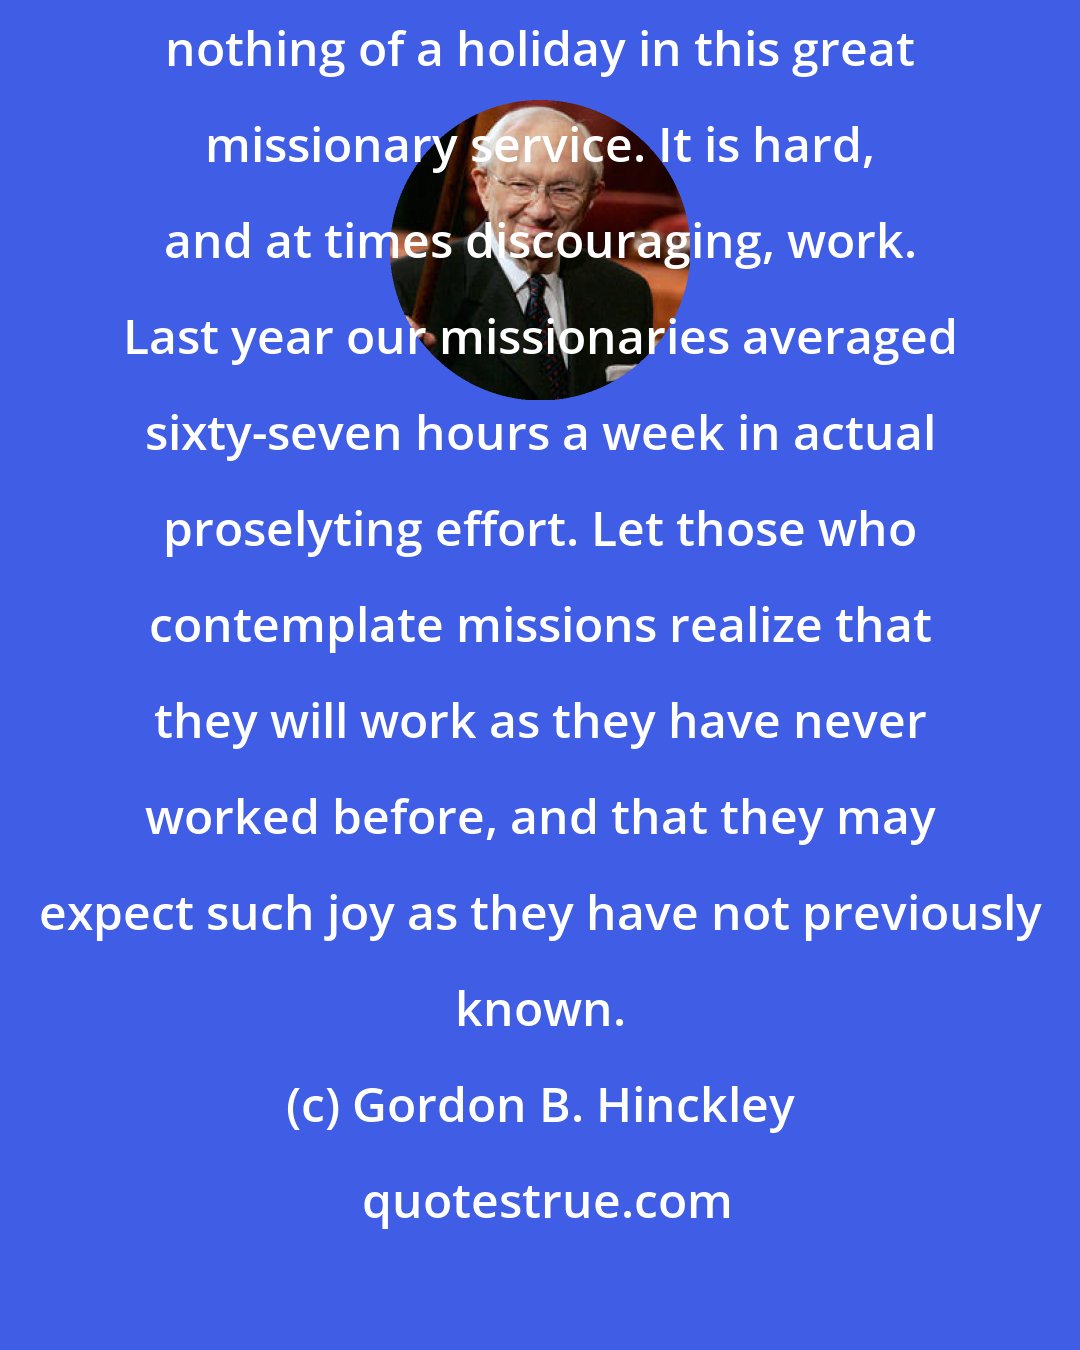 Gordon B. Hinckley: We should also build the attitude that there is nothing of a vacation, nothing of a holiday in this great missionary service. It is hard, and at times discouraging, work. Last year our missionaries averaged sixty-seven hours a week in actual proselyting effort. Let those who contemplate missions realize that they will work as they have never worked before, and that they may expect such joy as they have not previously known.